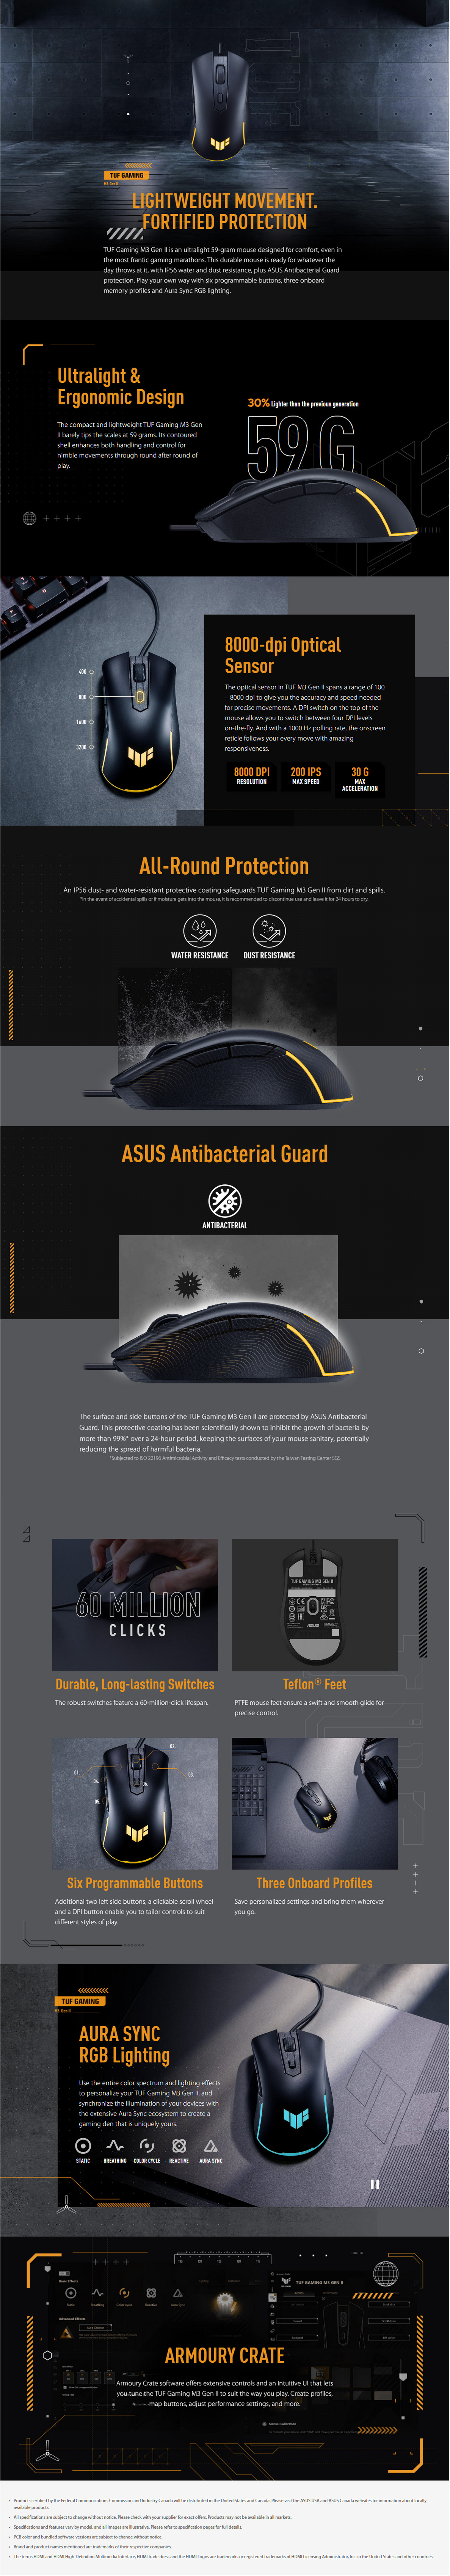 A large marketing image providing additional information about the product ASUS TUF Gaming M3 Gen II Wired Gaming Mouse - Additional alt info not provided